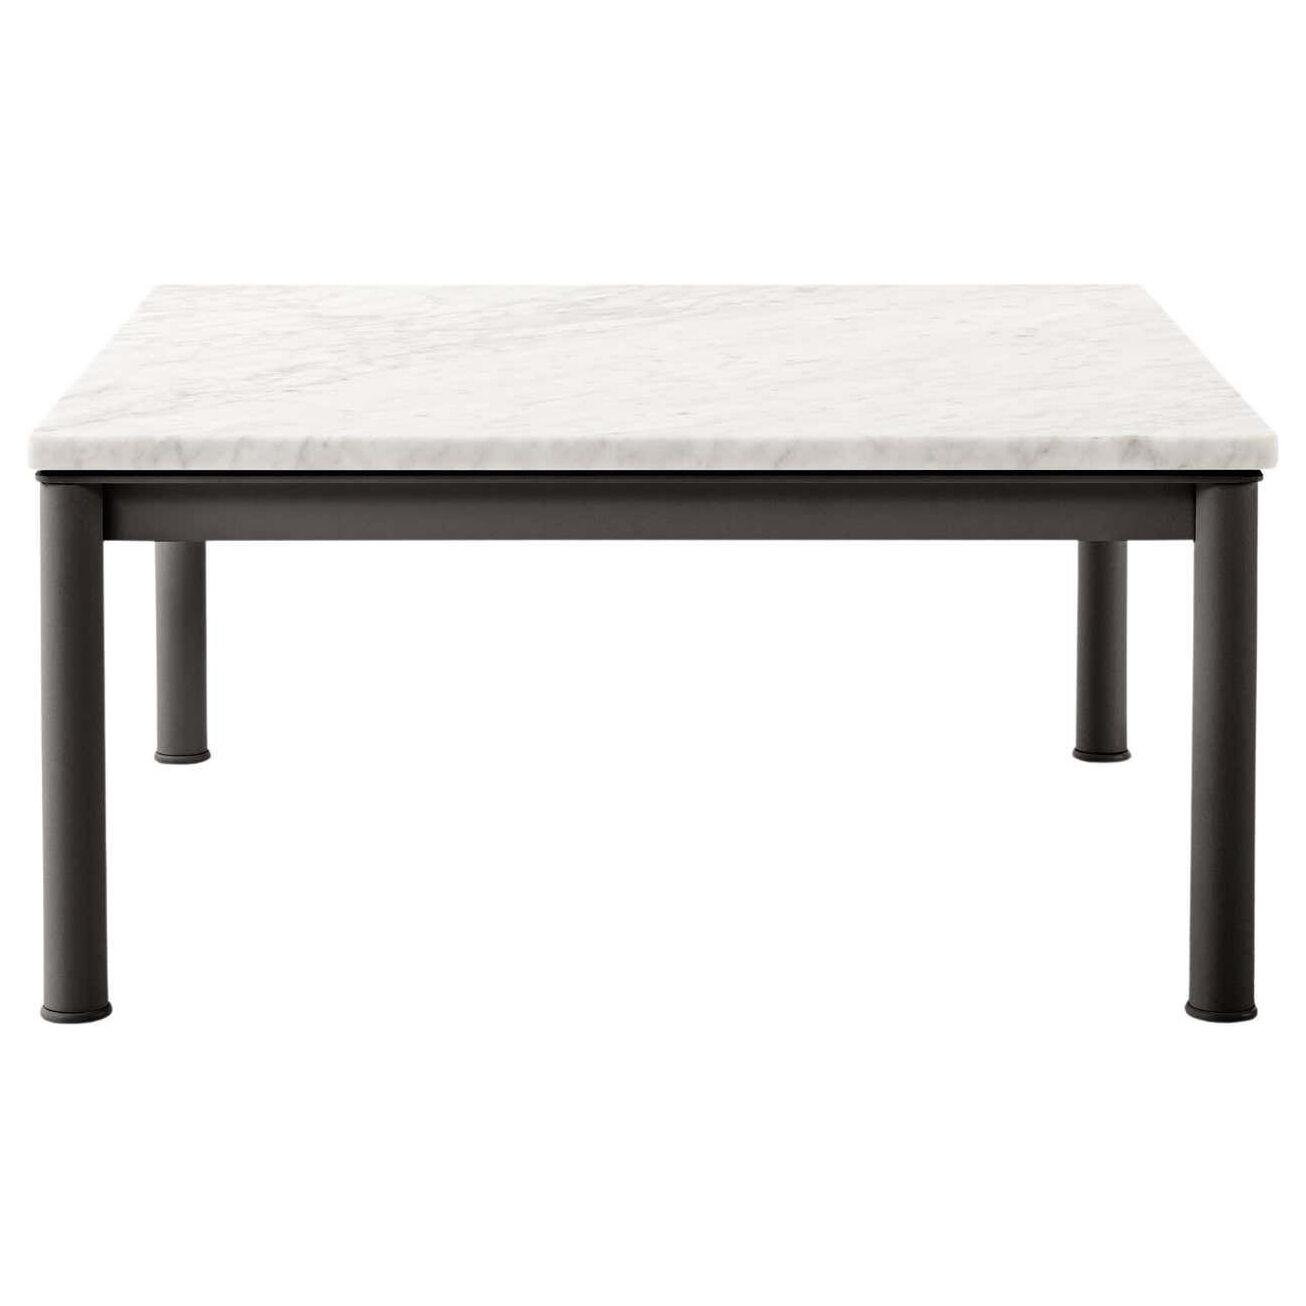 Le Corbusier, Pierre Jeanneret, Charlotte Perriand LC10 T5 Table by Cassina